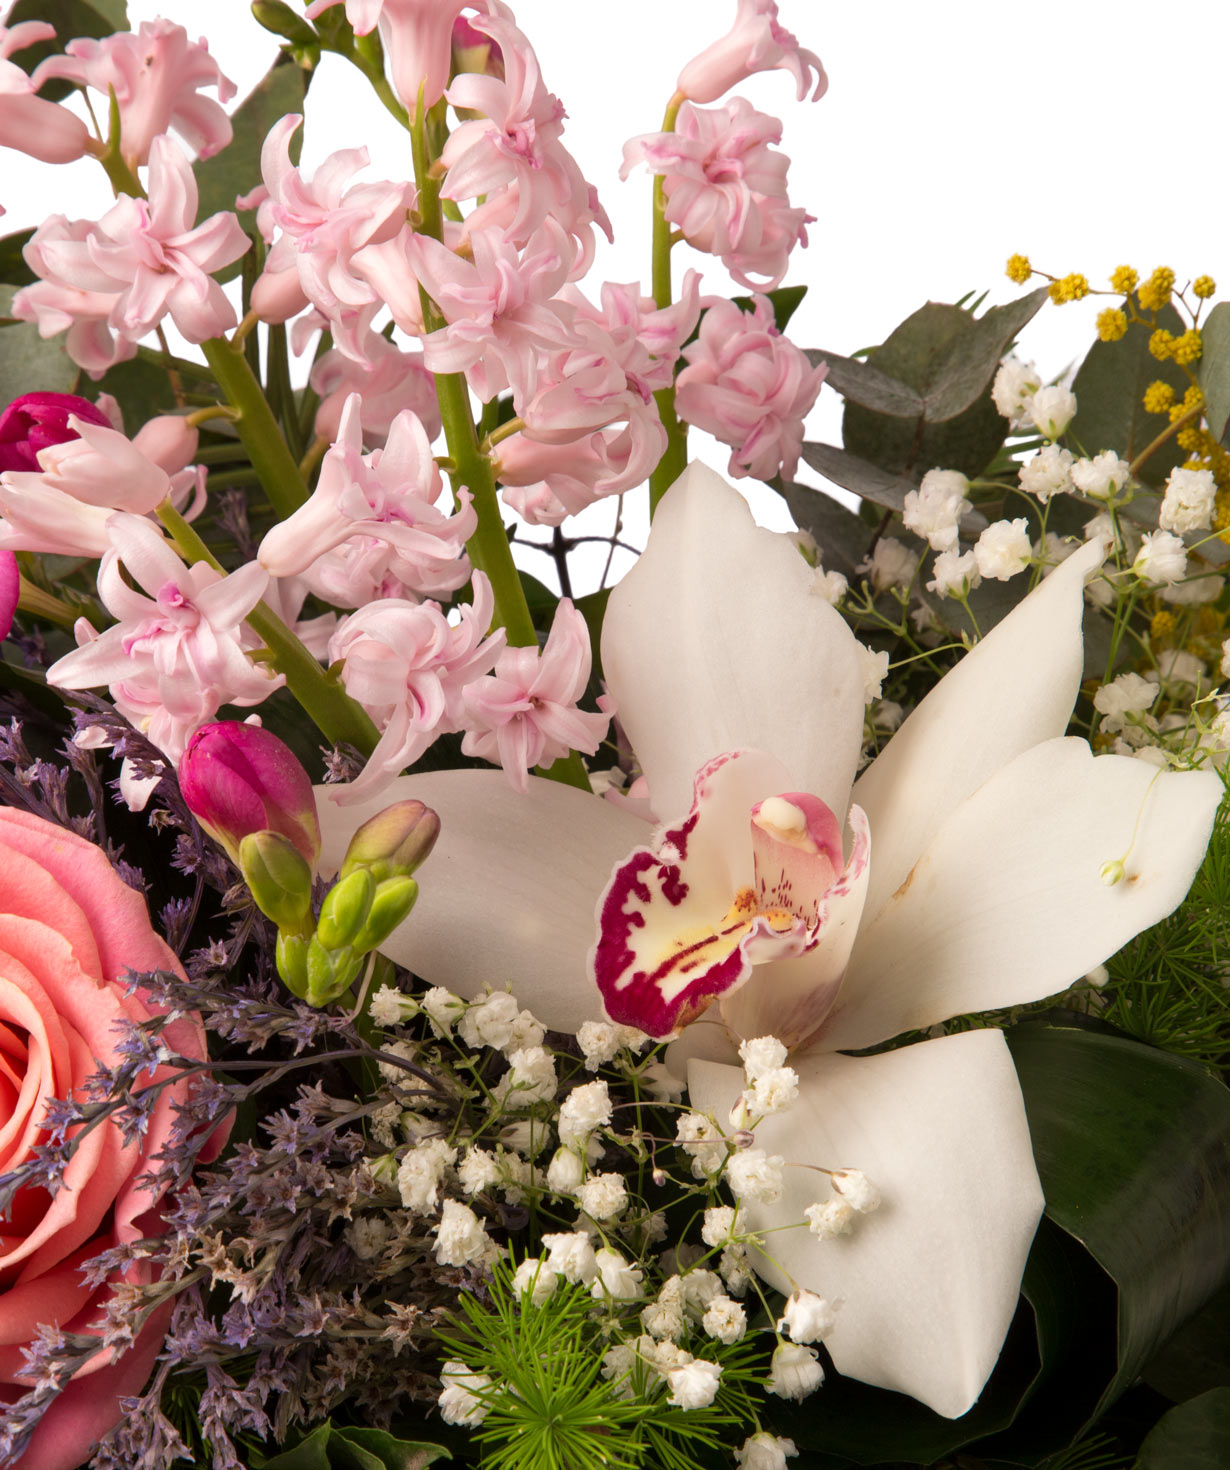 Composition `Ayer` with roses, orchids and freesias